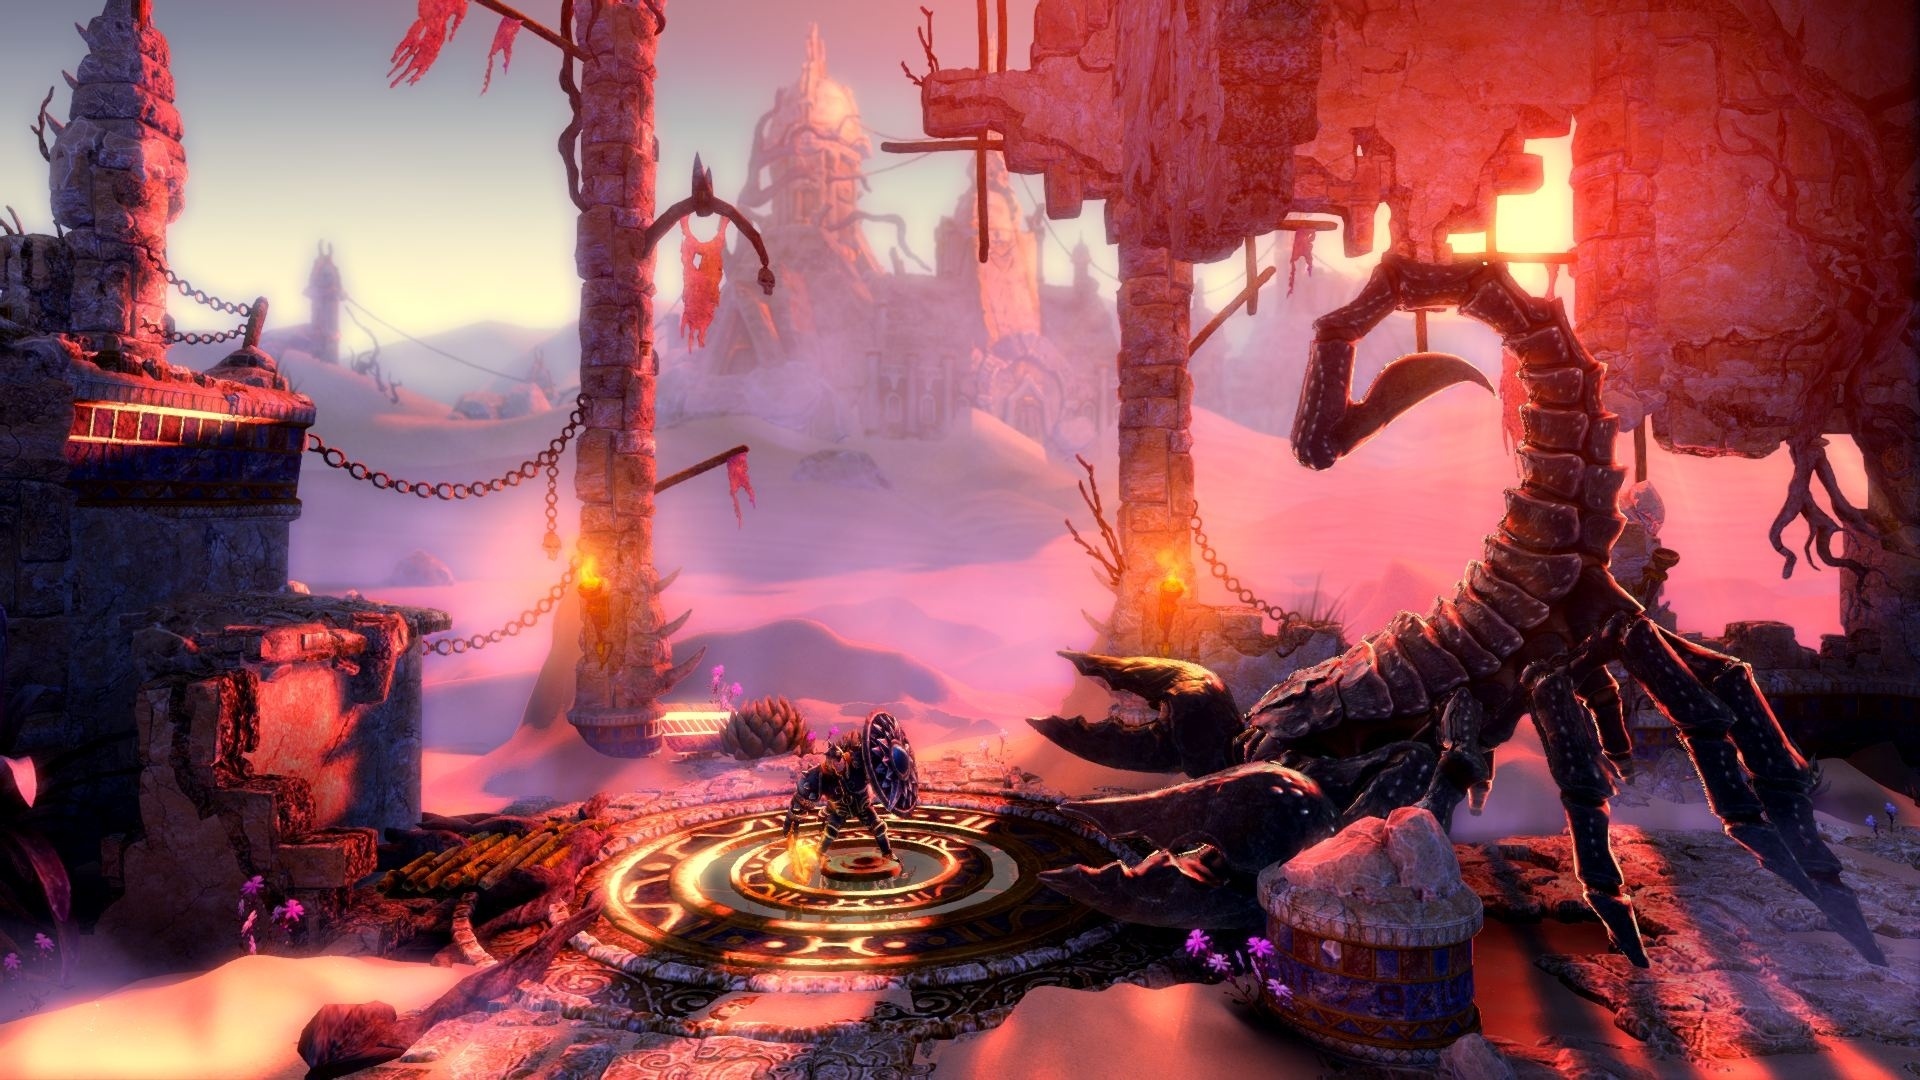 trine 3 ps4 download